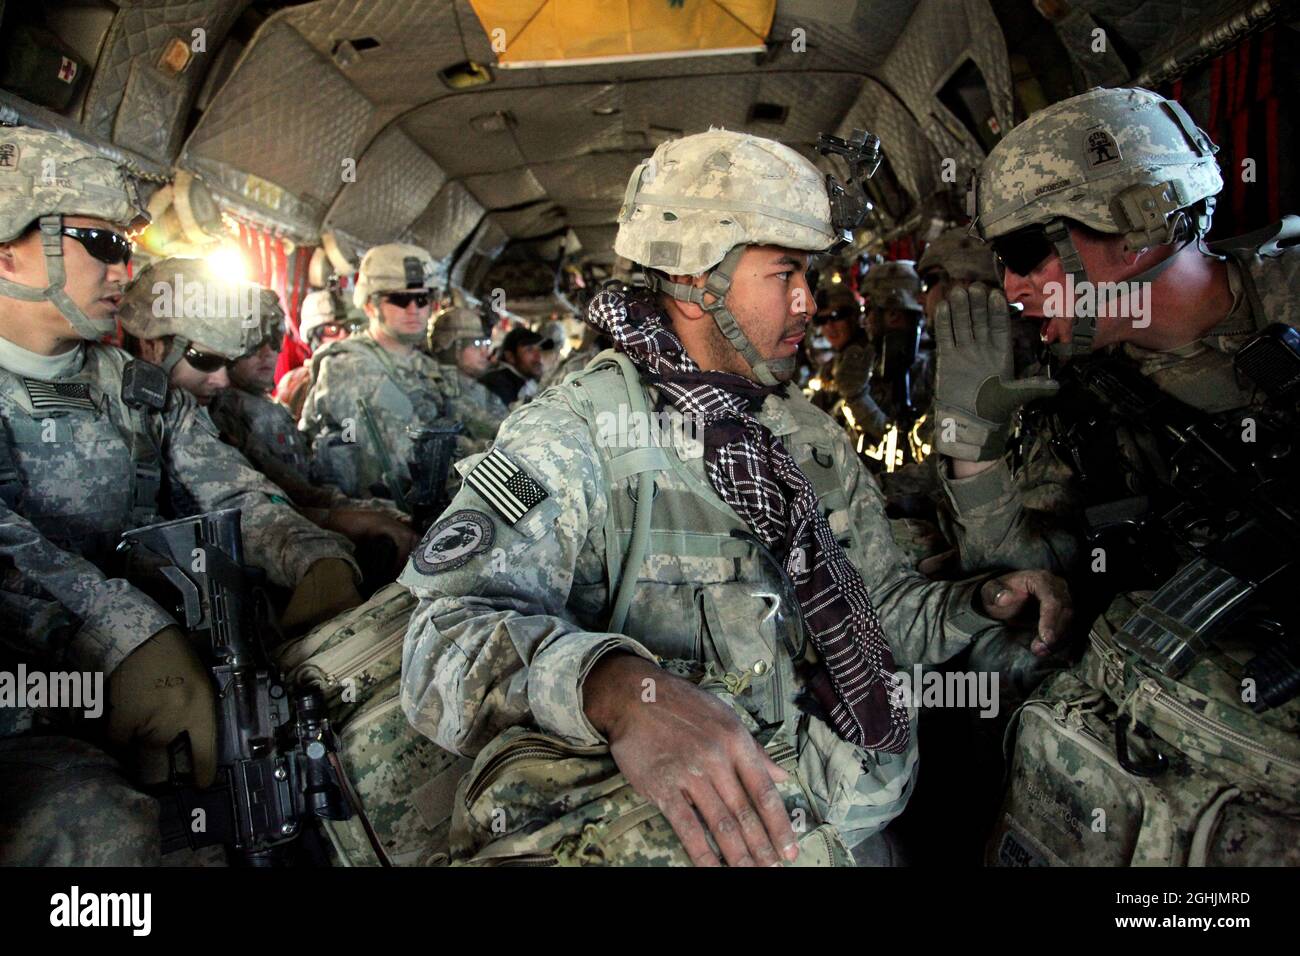 U.S. Army Soldiers prepare to conduct combat operations aboard a CH-47 Chinook helicopter in Paktika province, Afghanistan, Dec. 18. Stock Photo